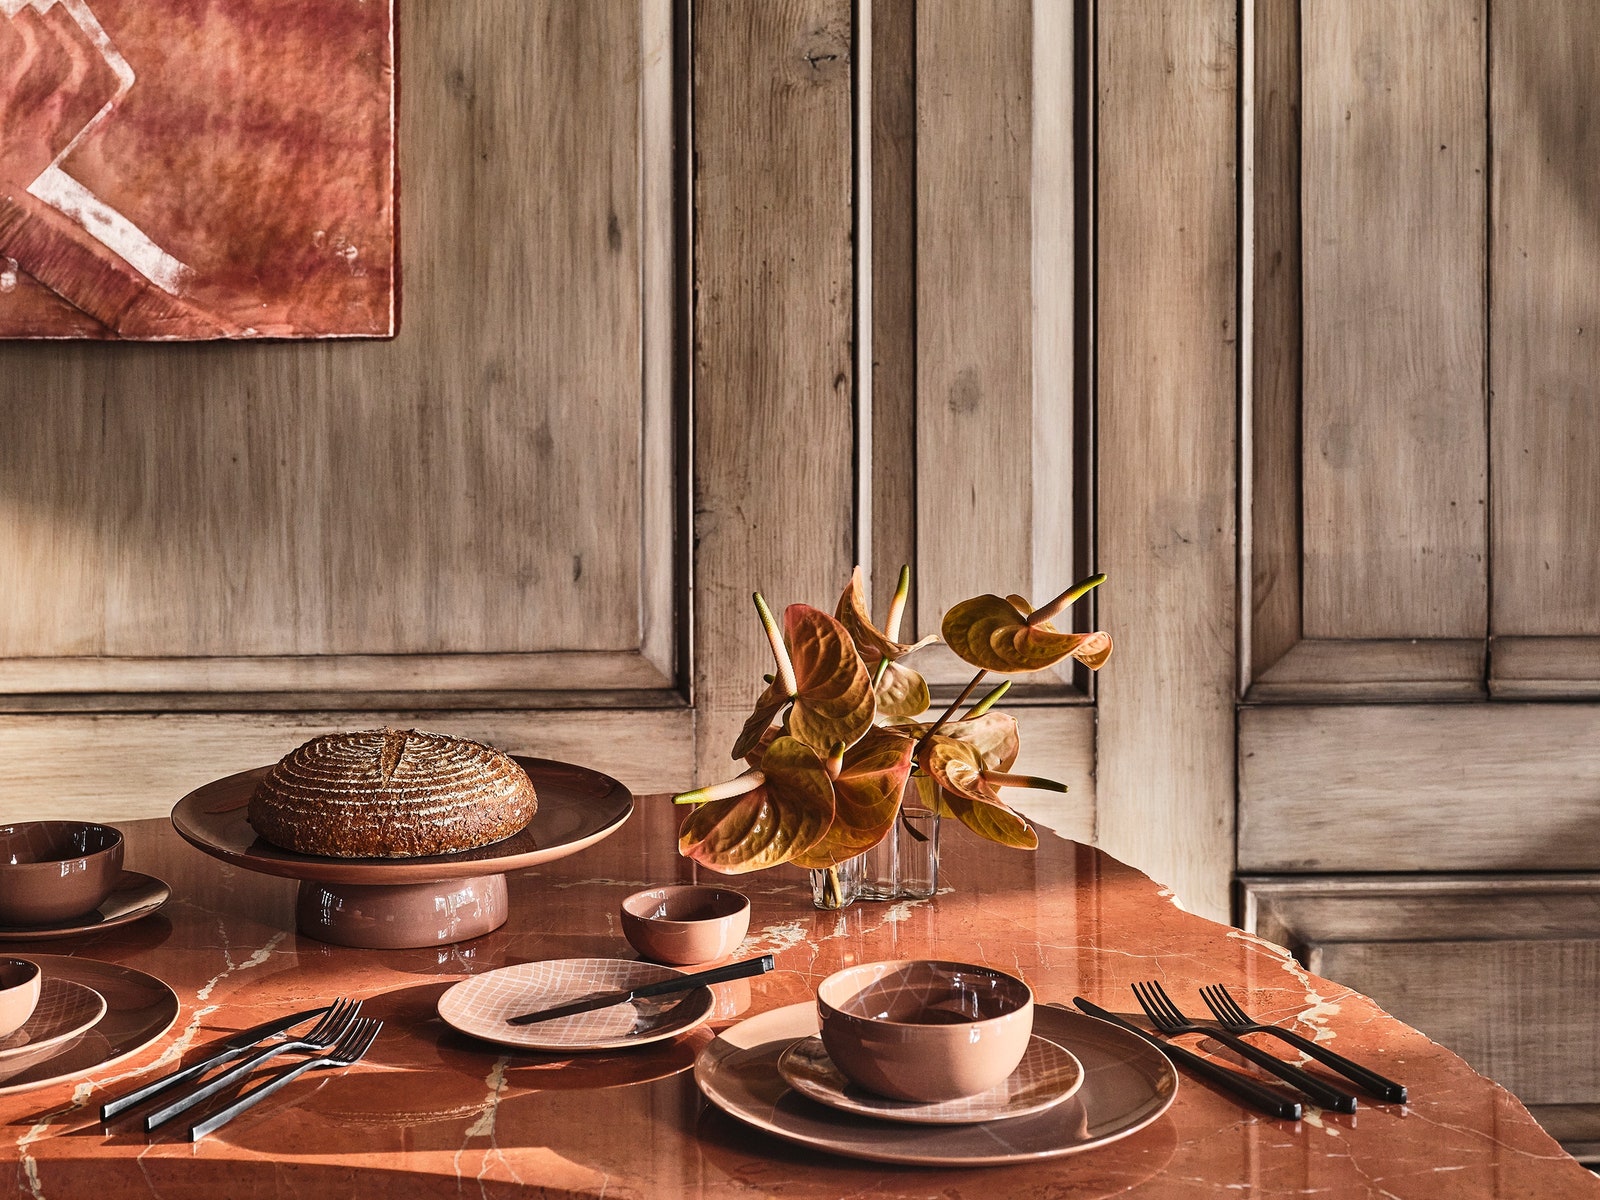 Kelly Wearstler’s New Collection With Serax Is What Tabletop Dreams Are Made Of